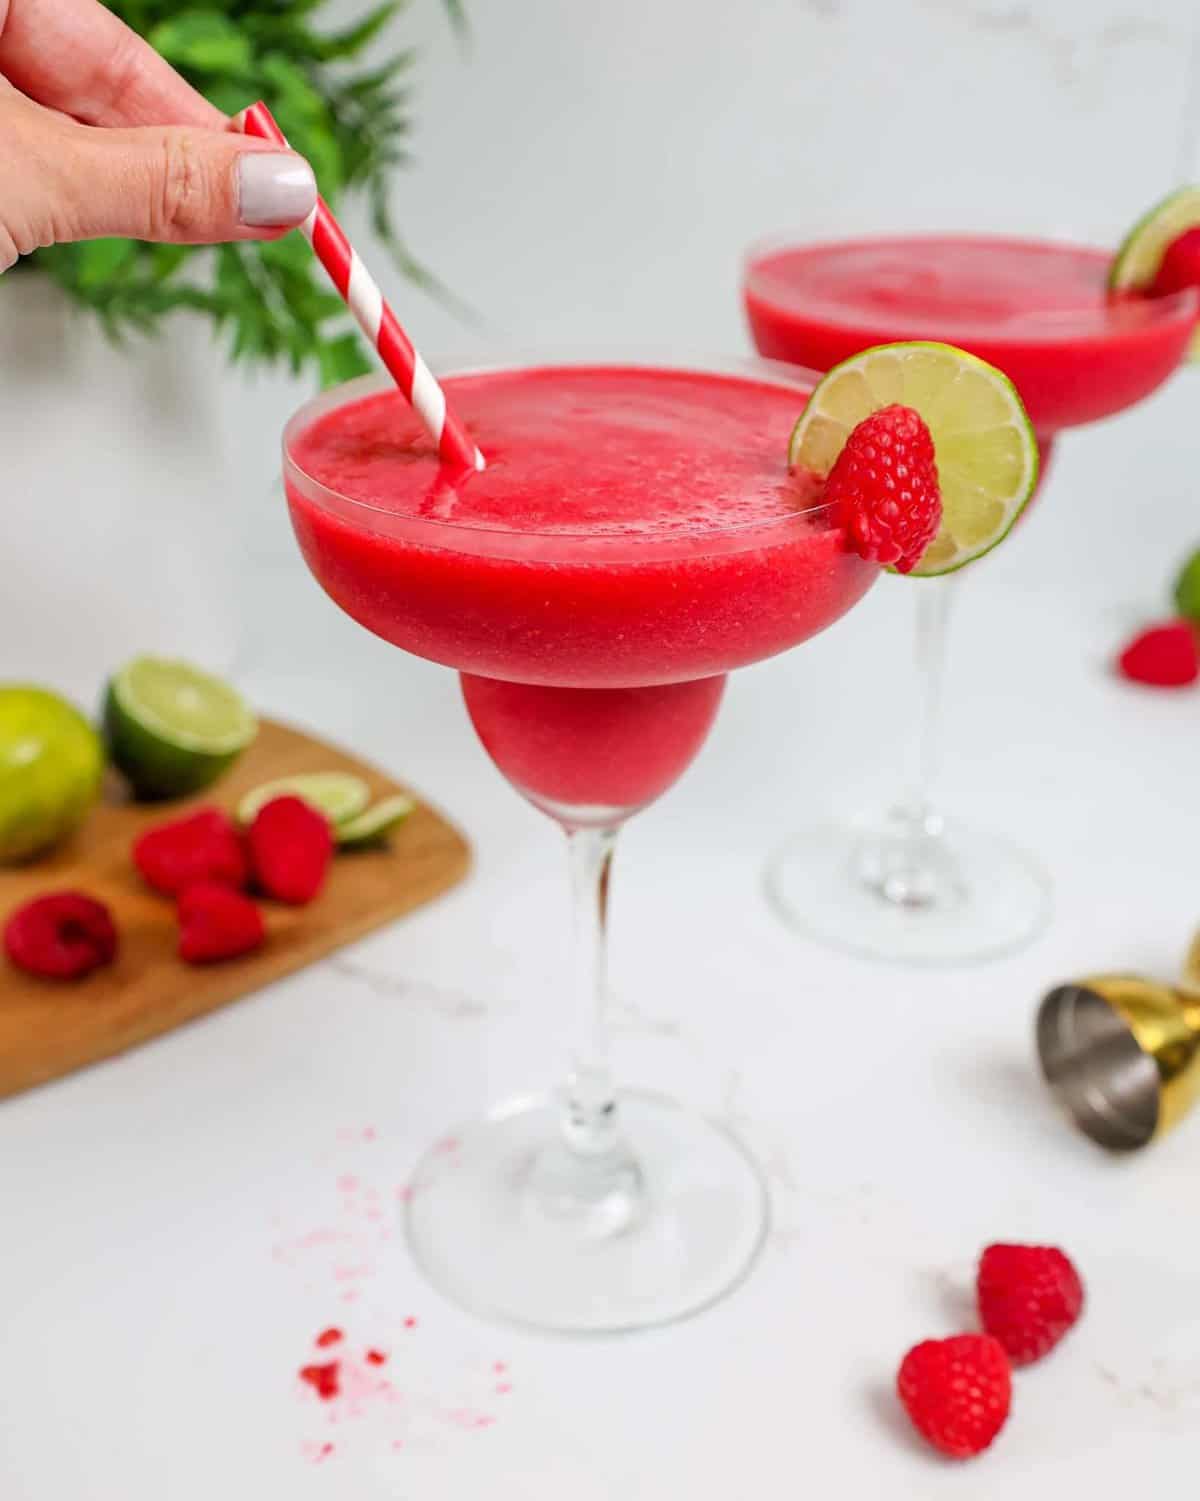  Garnished with a slice of lime and a fresh raspberry for a pop of color.